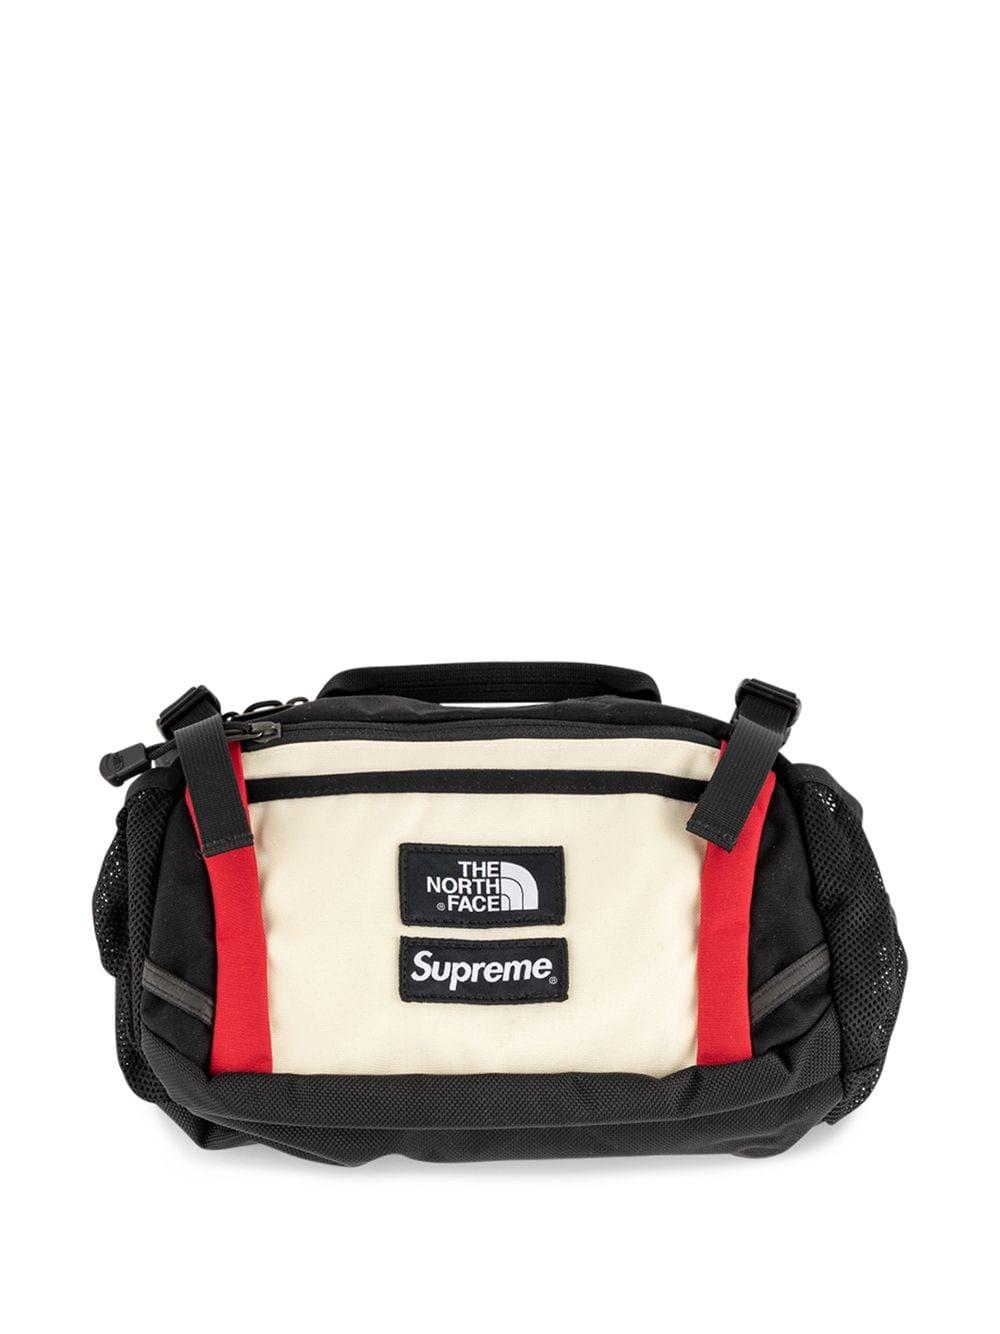 Supreme X The North Face Expedition Waist Bag in Black - Lyst